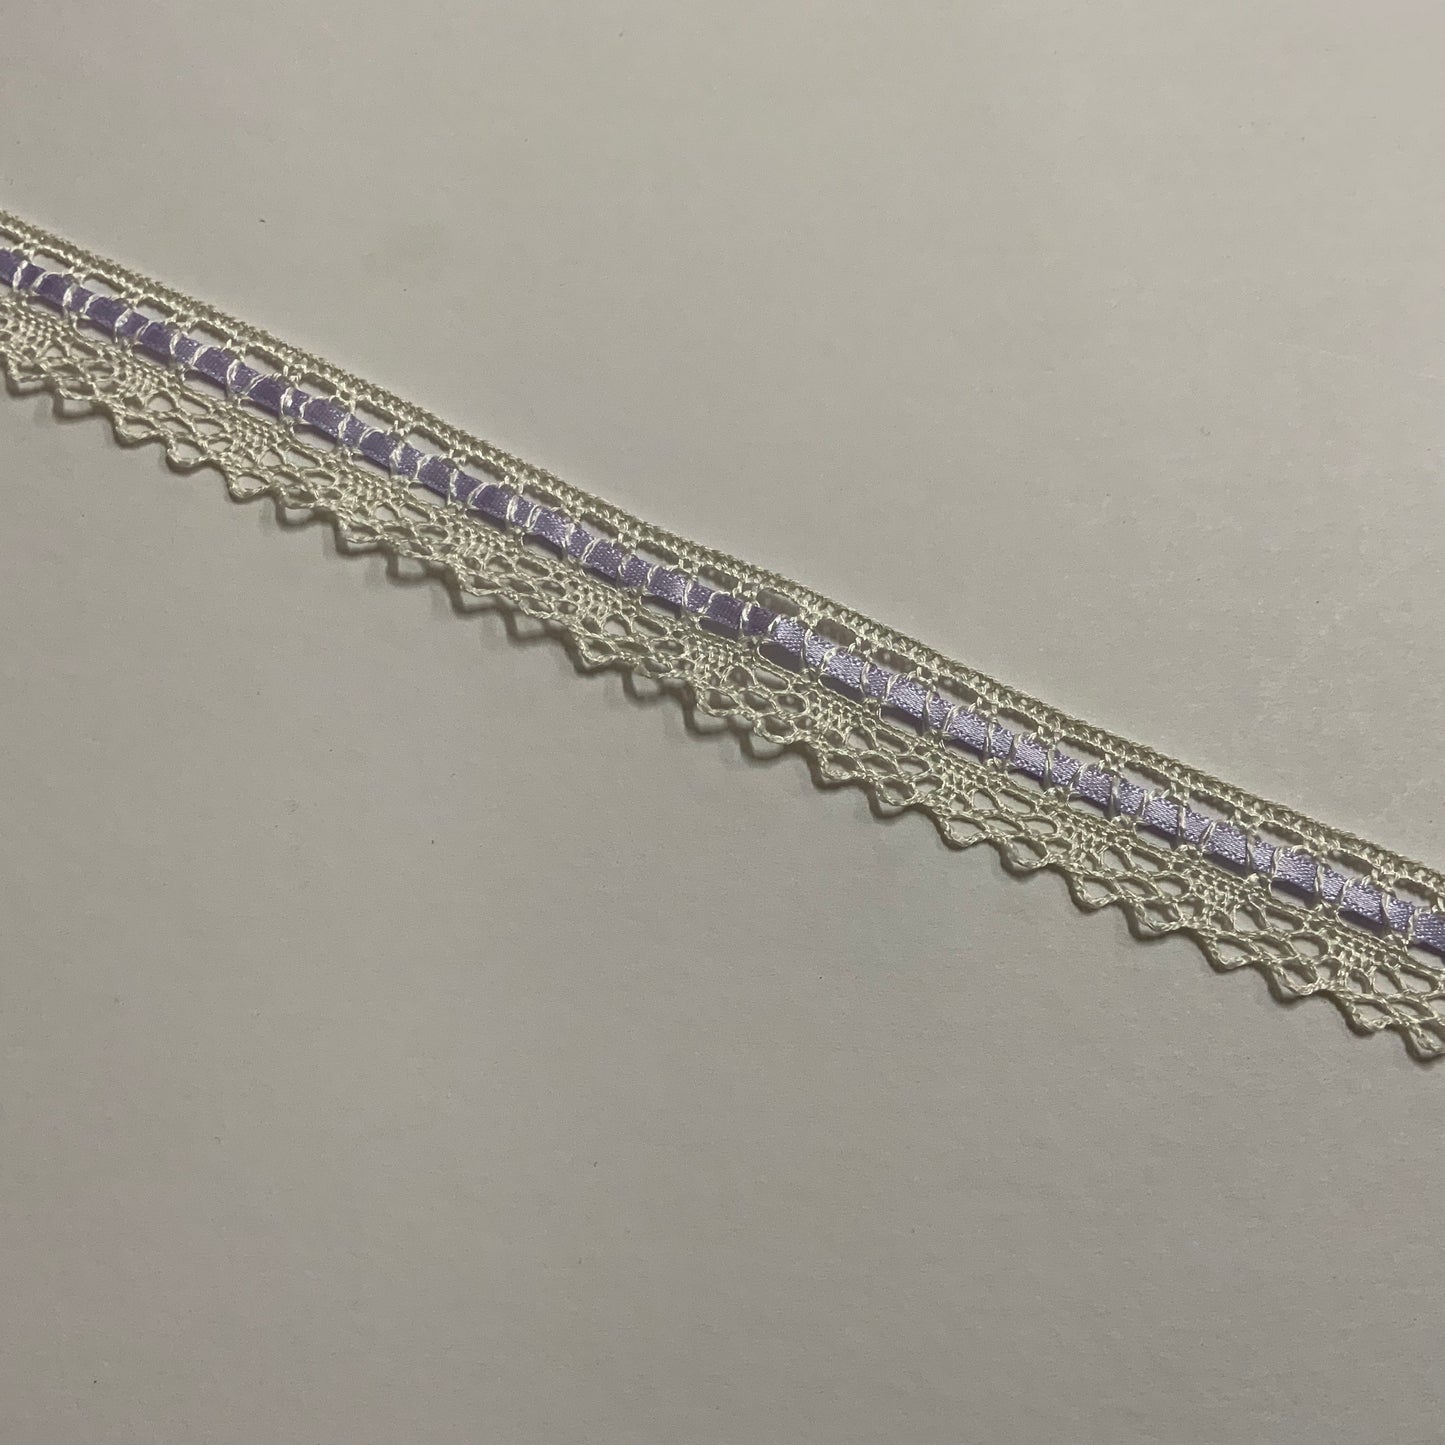 Ivory Lace with Insert of 3mm Lilac Satin Ribbon